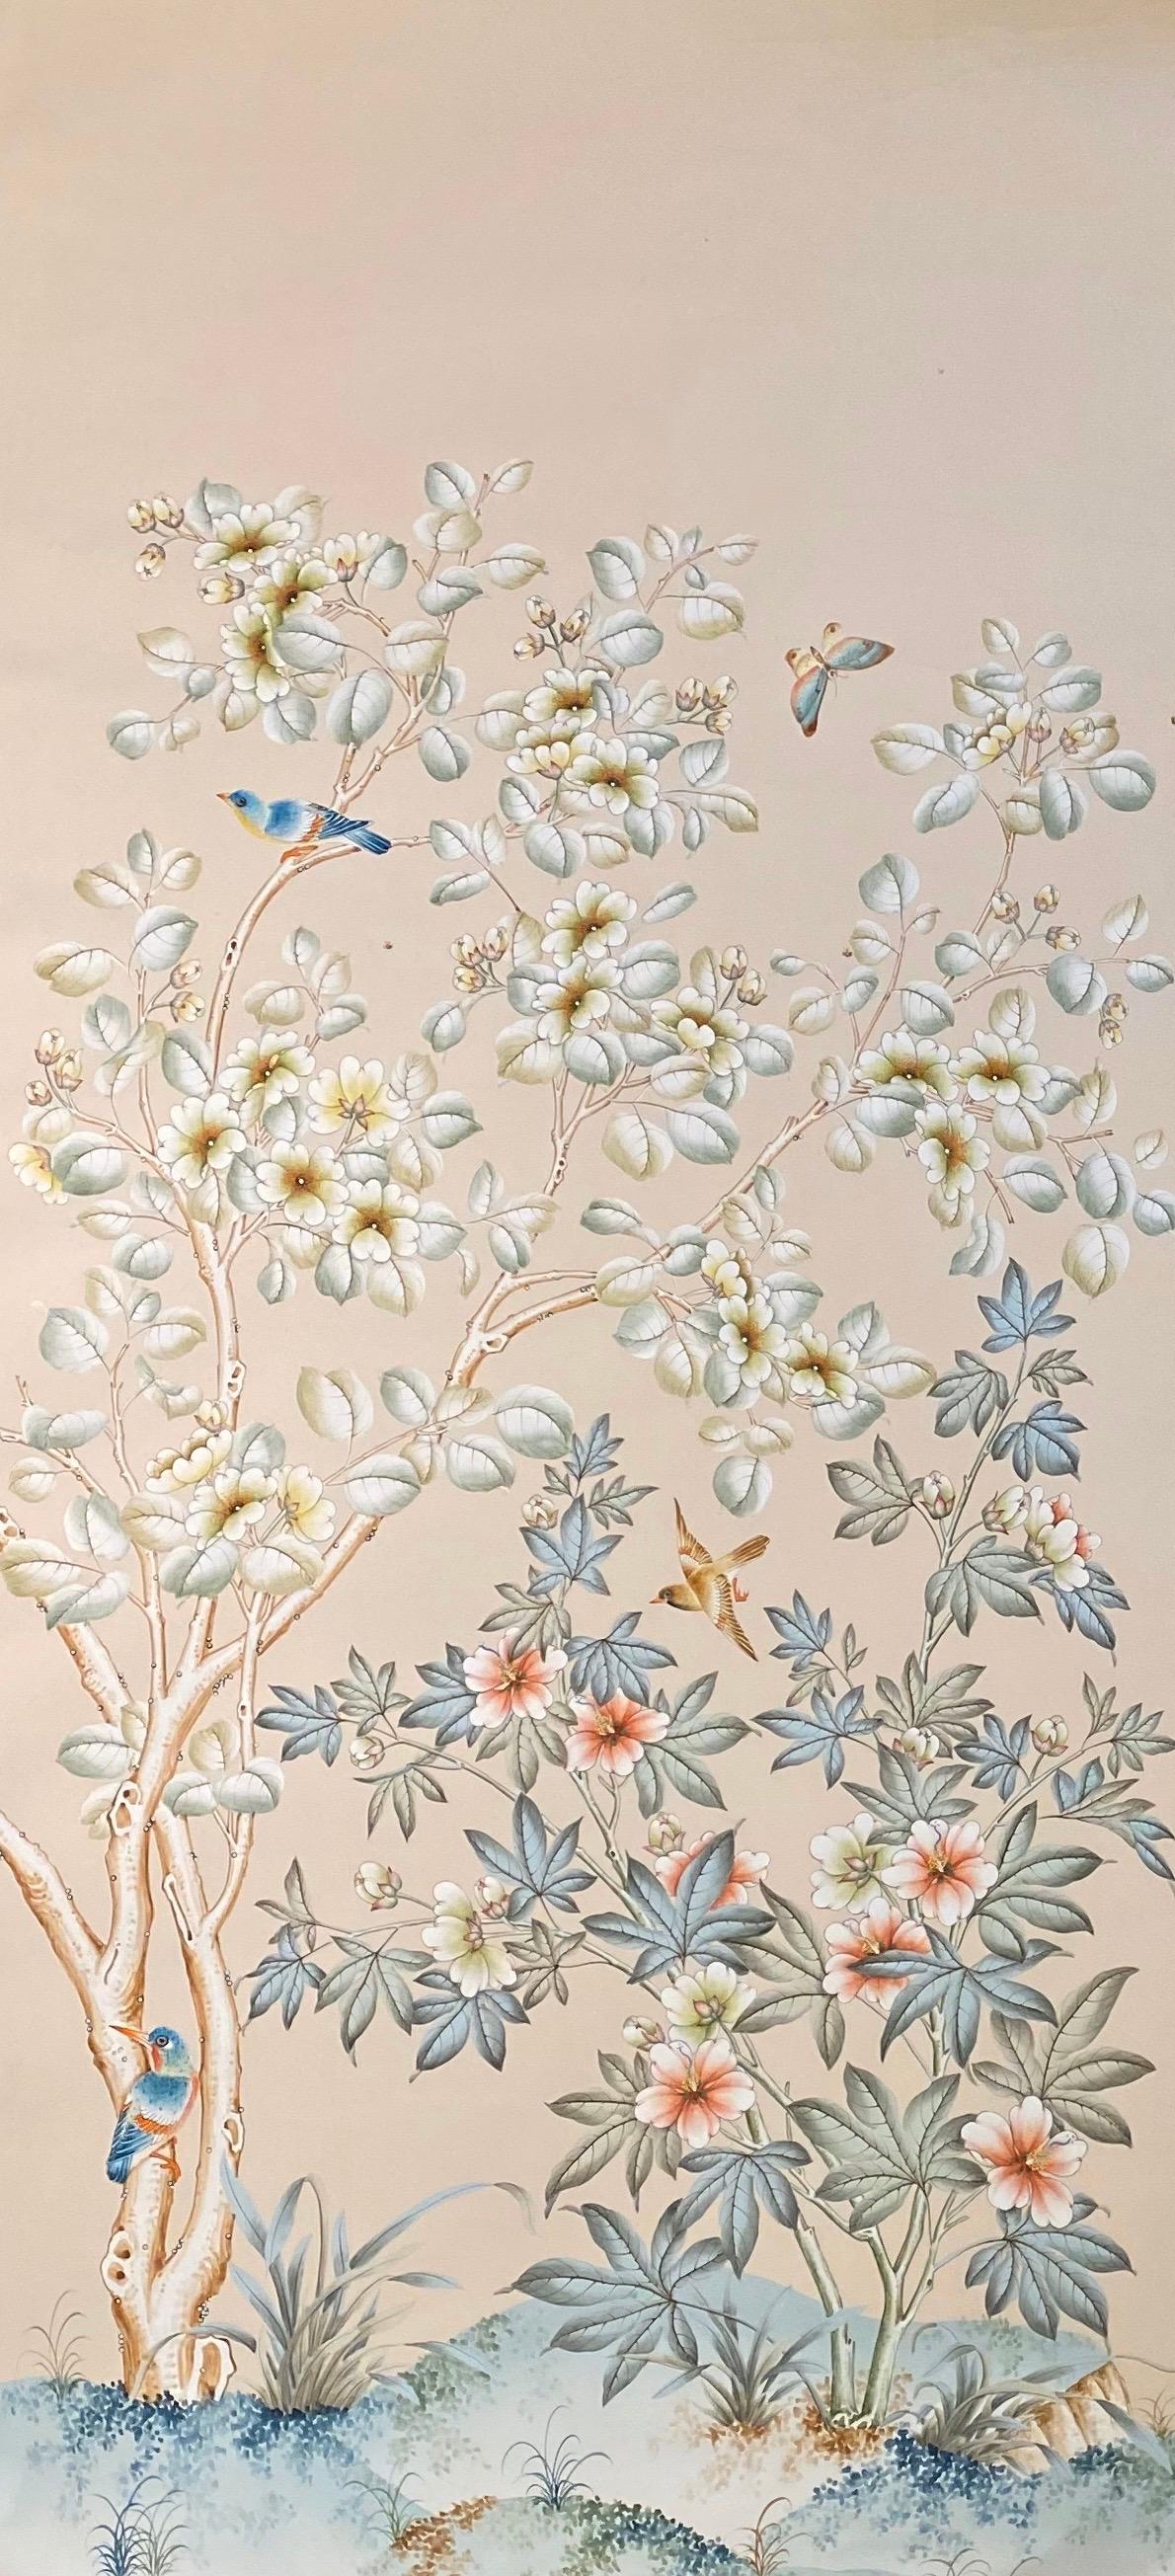 Two gorgeous and unique hand painted panels by Gracie, the firm known for its exquisitely detailed wallpaper, since 1898.

These two panels are the same pattern, but they do not connect. They will be absolutely gorgeous framed and used in the same